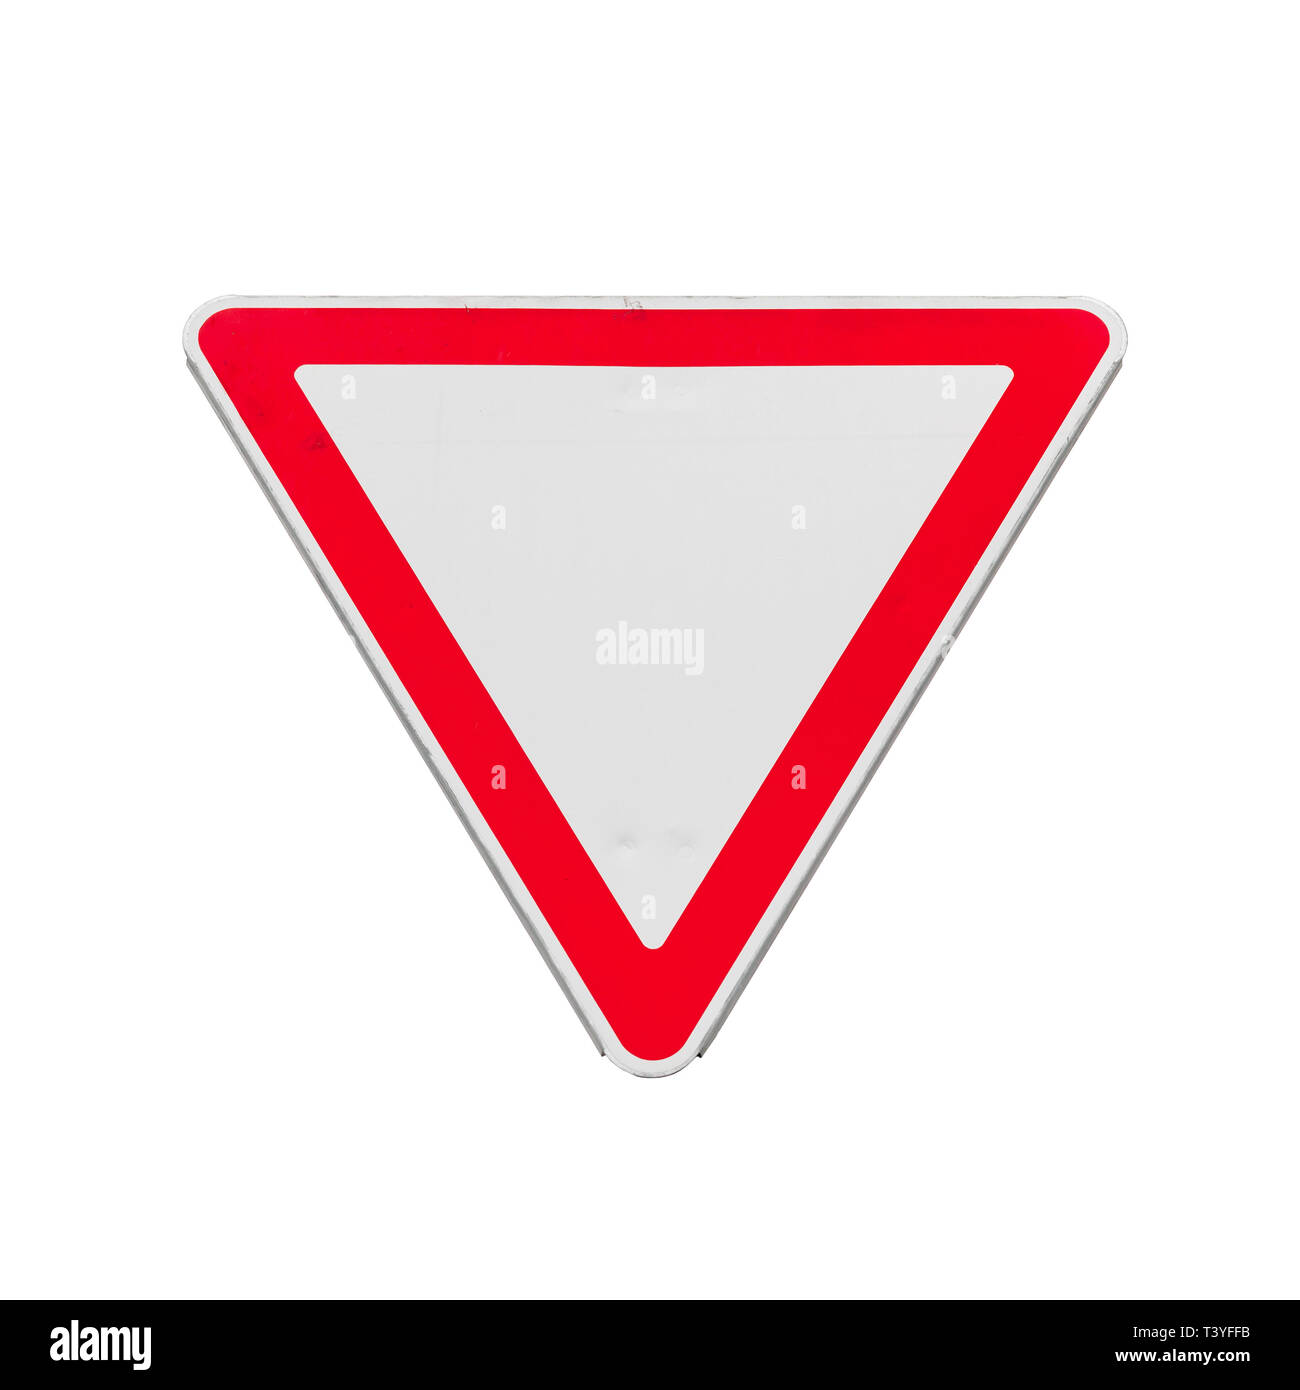 Give way, triangle road sign isolated on white background, close up photo Stock Photo